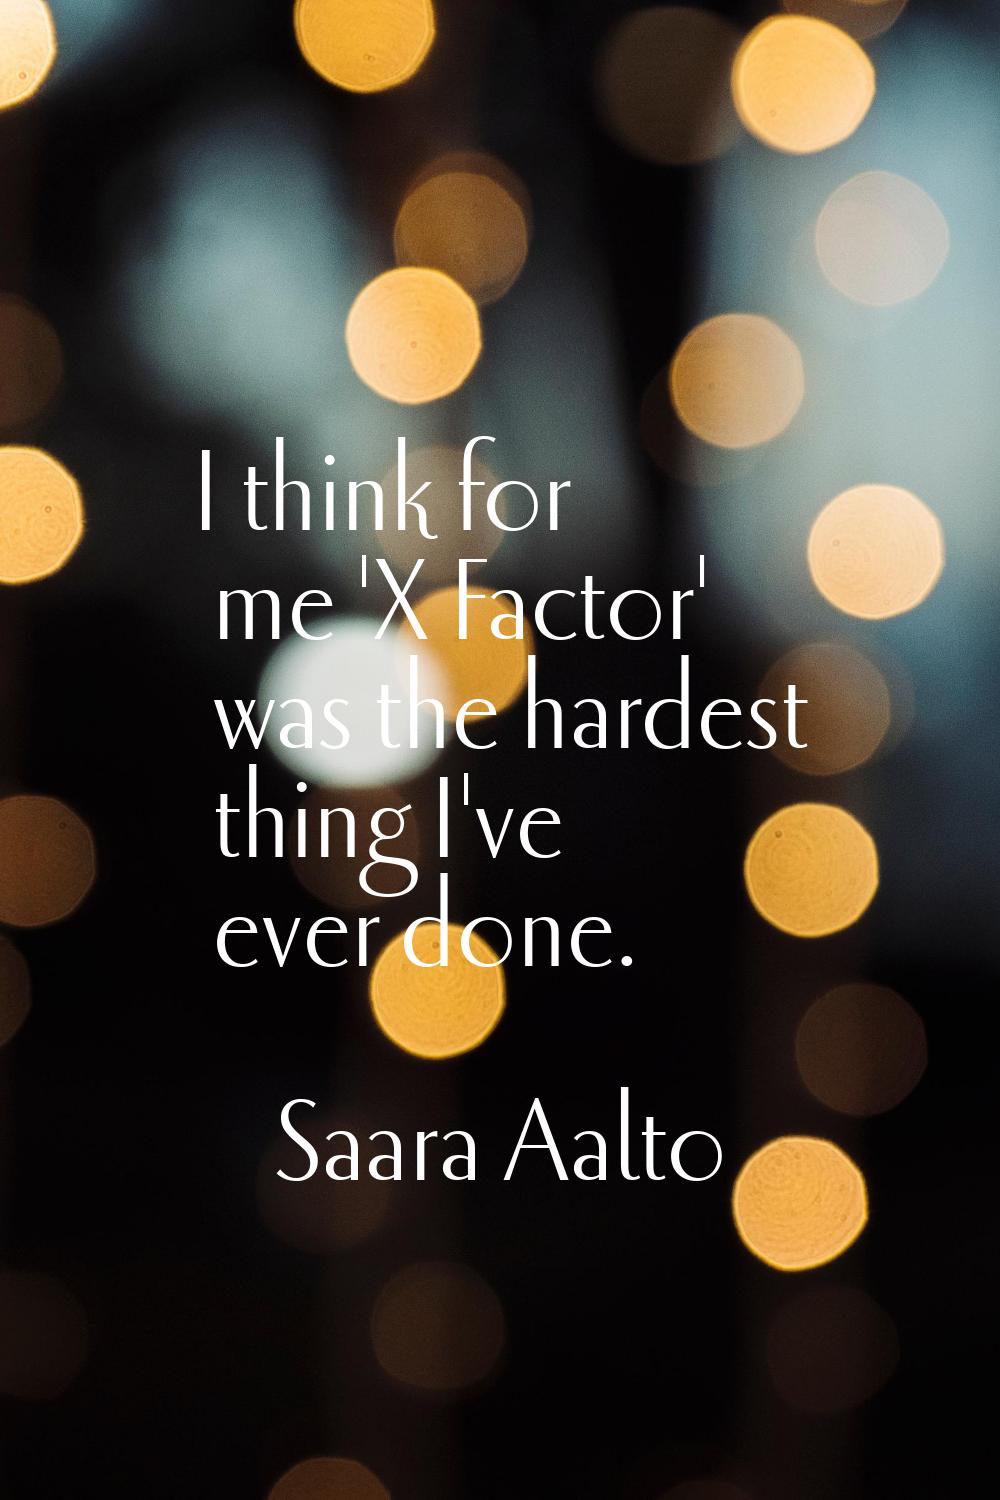 I think for me 'X Factor' was the hardest thing I've ever done.